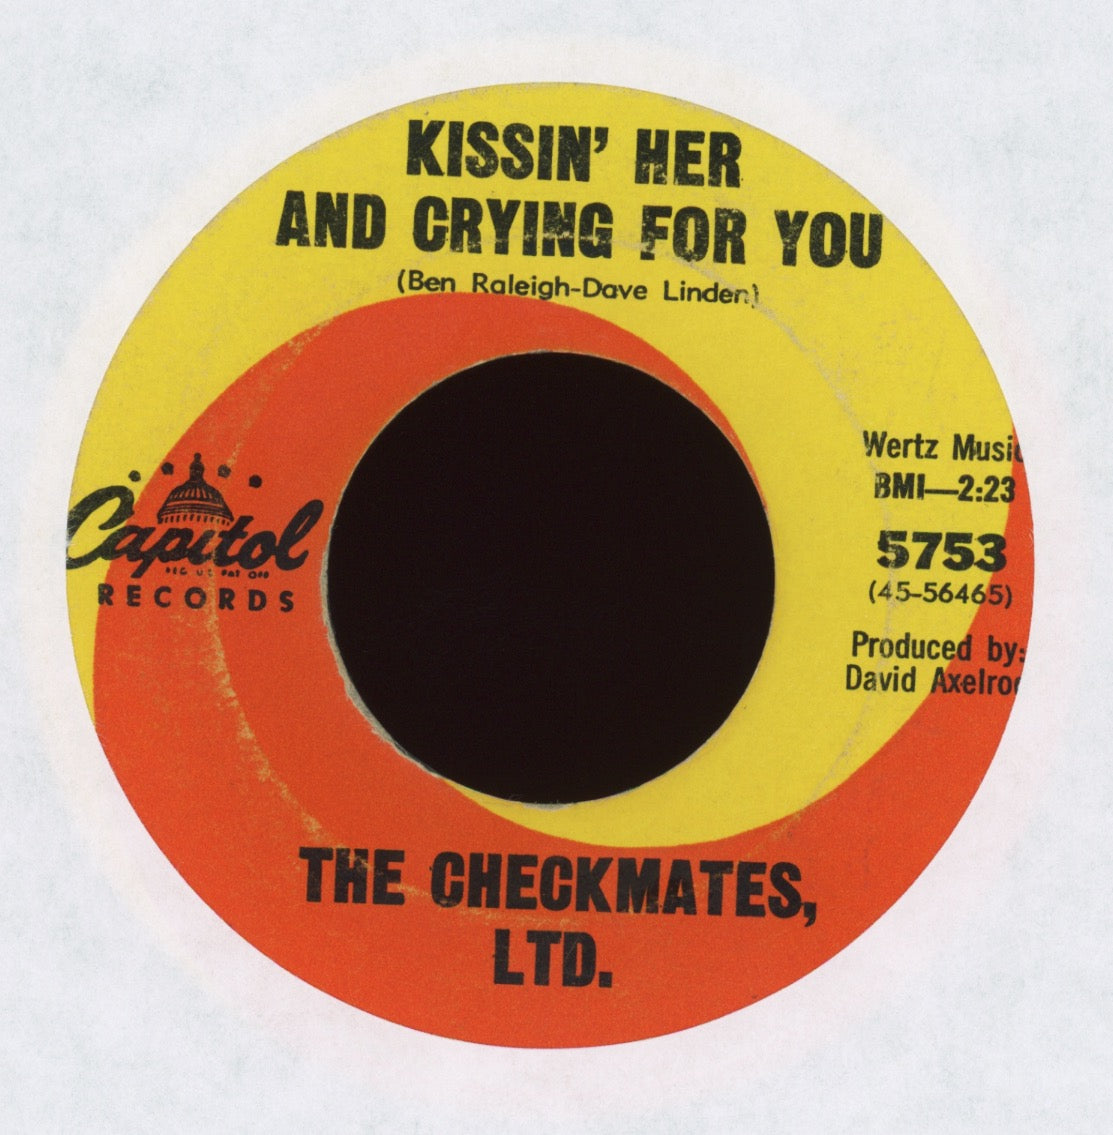 The Checkmates LTD. - Kissin' Her and Crying for You on Capitol